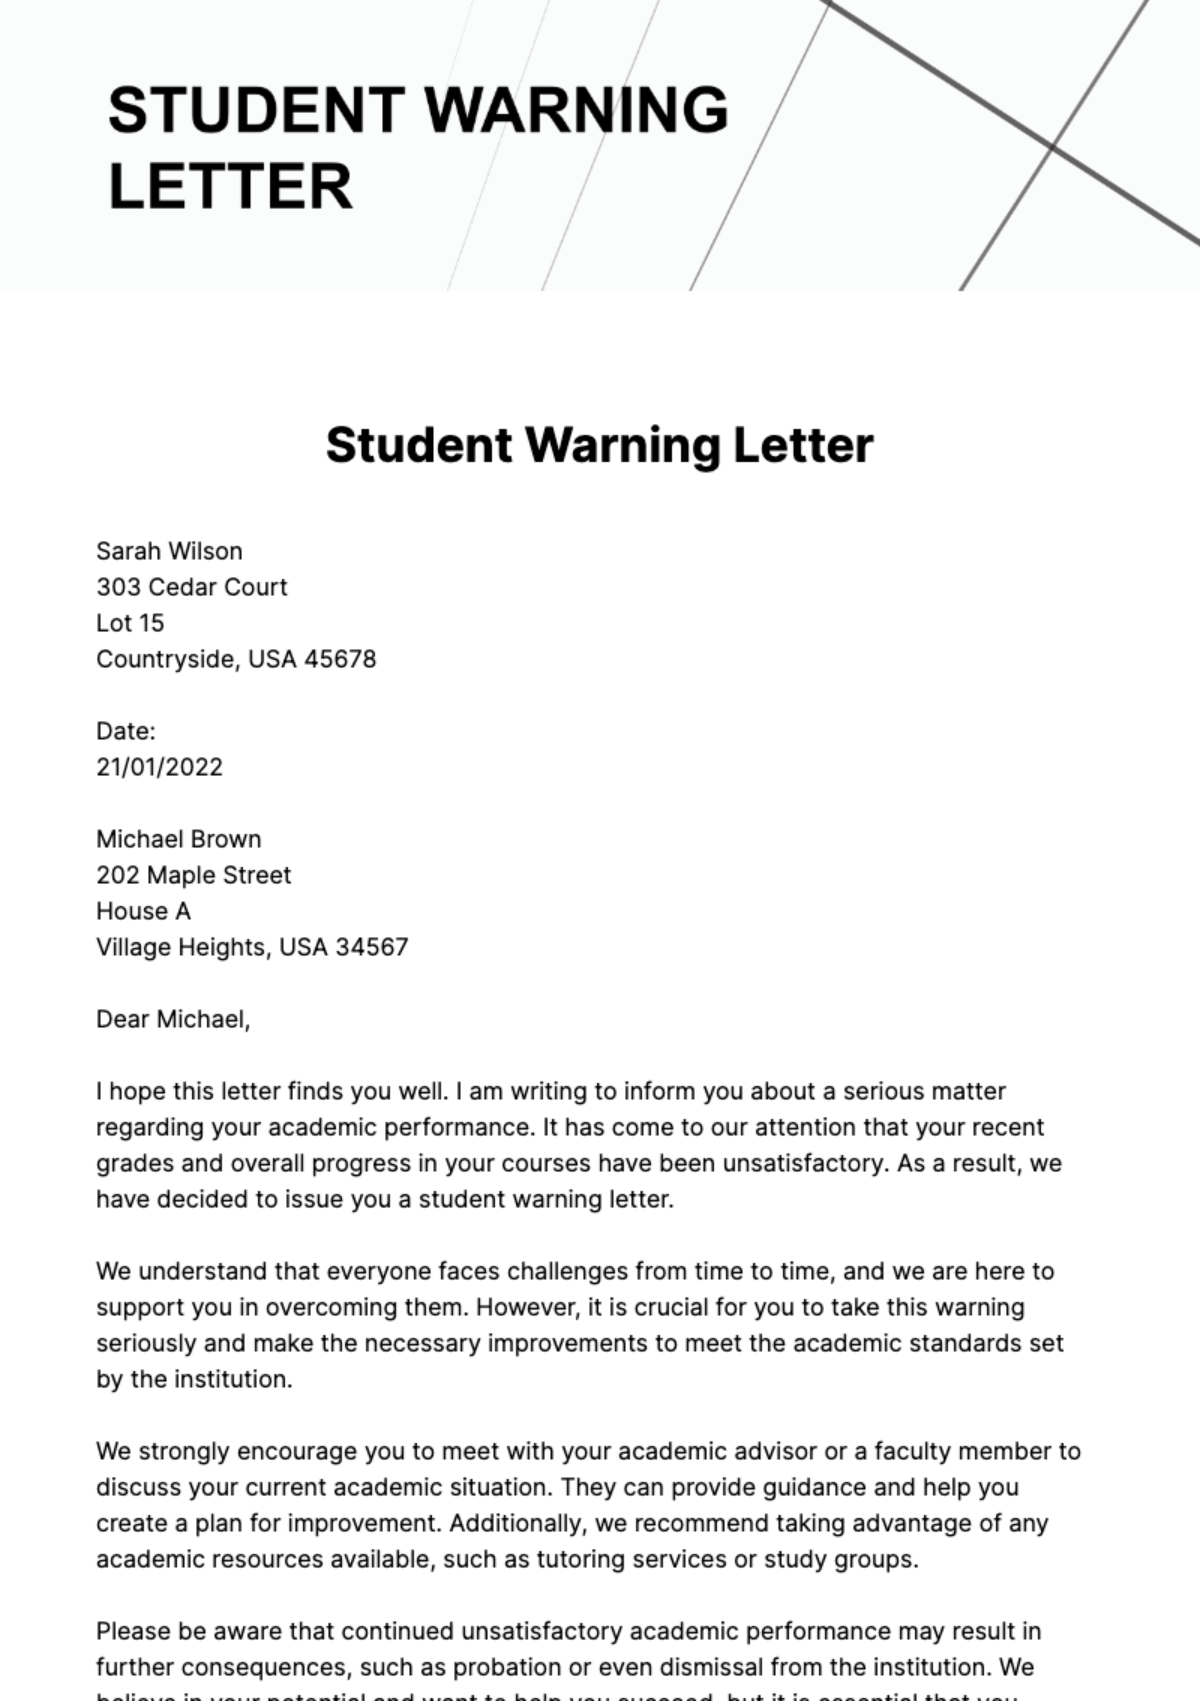 Free student warning letter Template